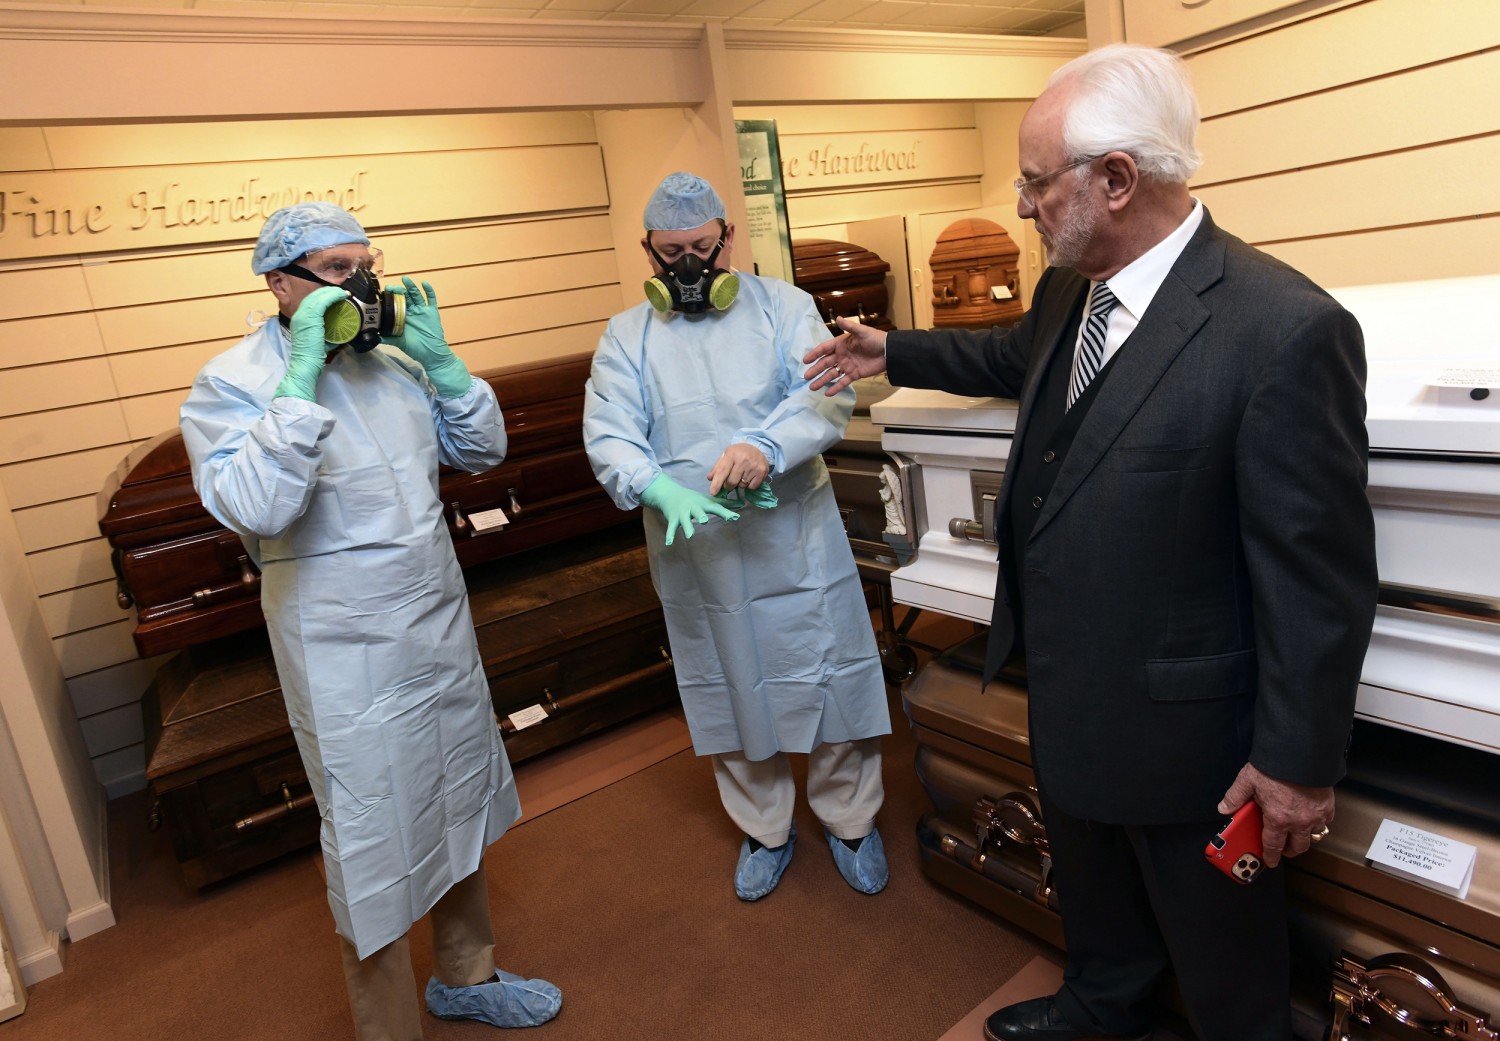 Hall of Famer Dawson deals with coronavirus as a mortician